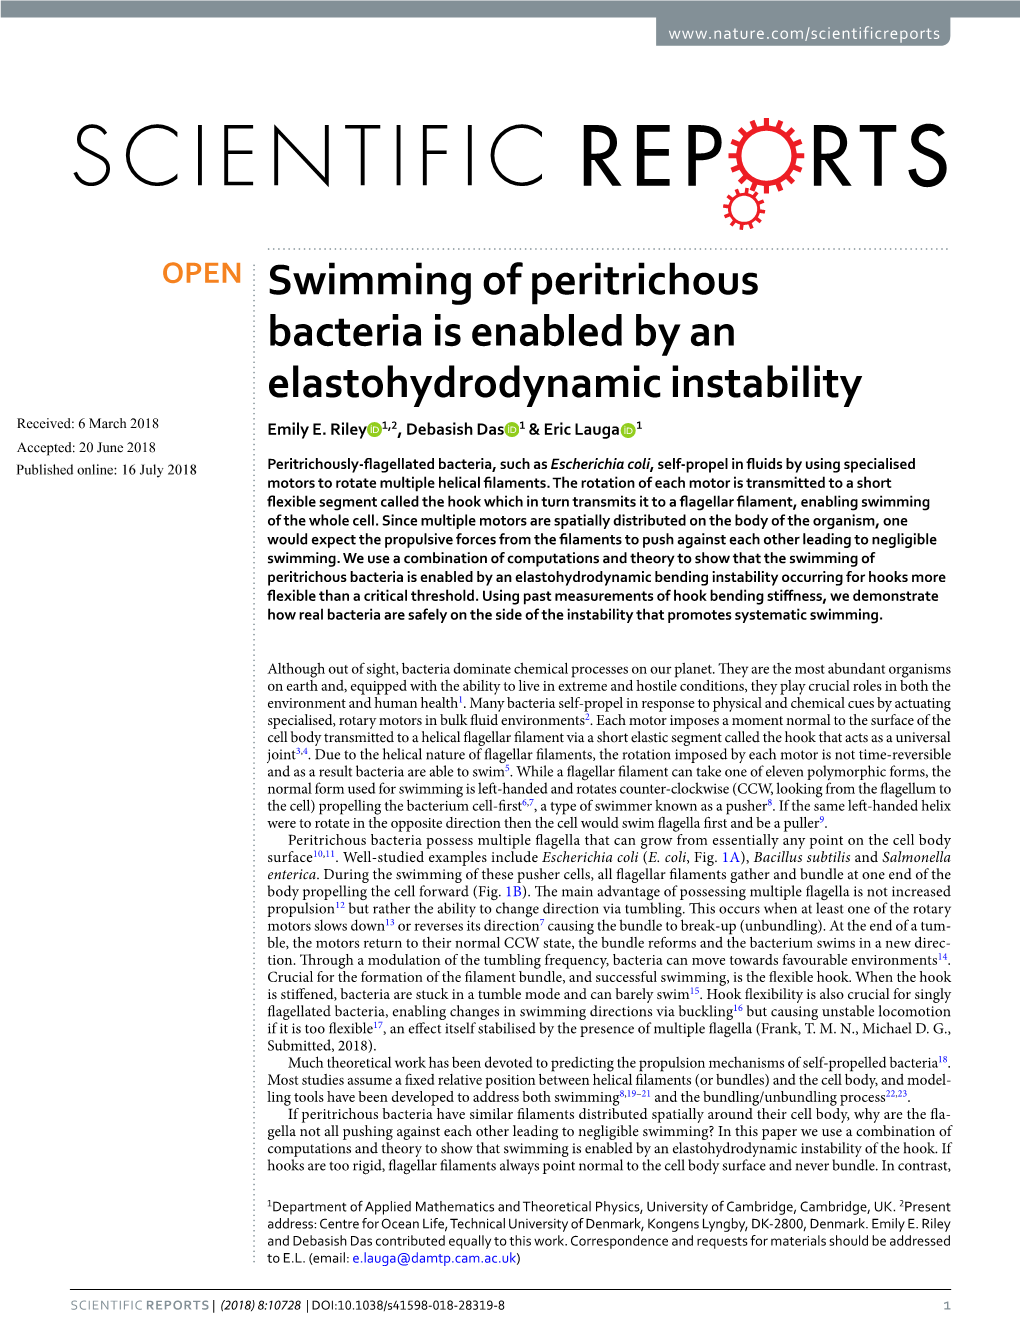 Swimming of Peritrichous Bacteria Is Enabled by an Elastohydrodynamic Instability Received: 6 March 2018 Emily E